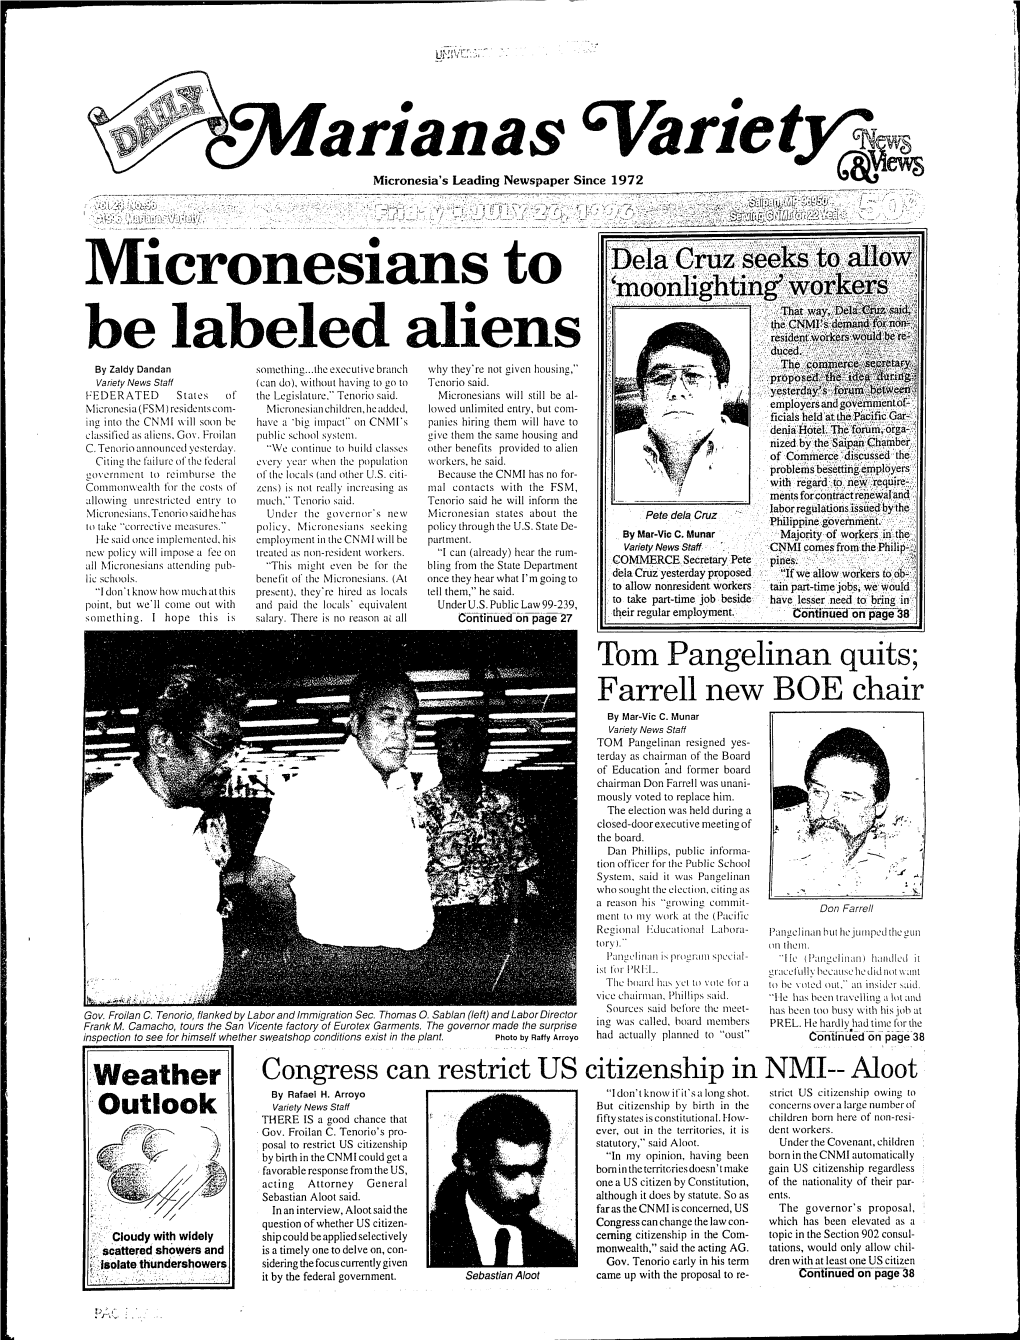 Arianas %Riet~~~ Micronesia's Leading Newspaper Since 1972 ~ Evvs Micronesians to Be Labeled Aliens by Zaldy Dandan Something